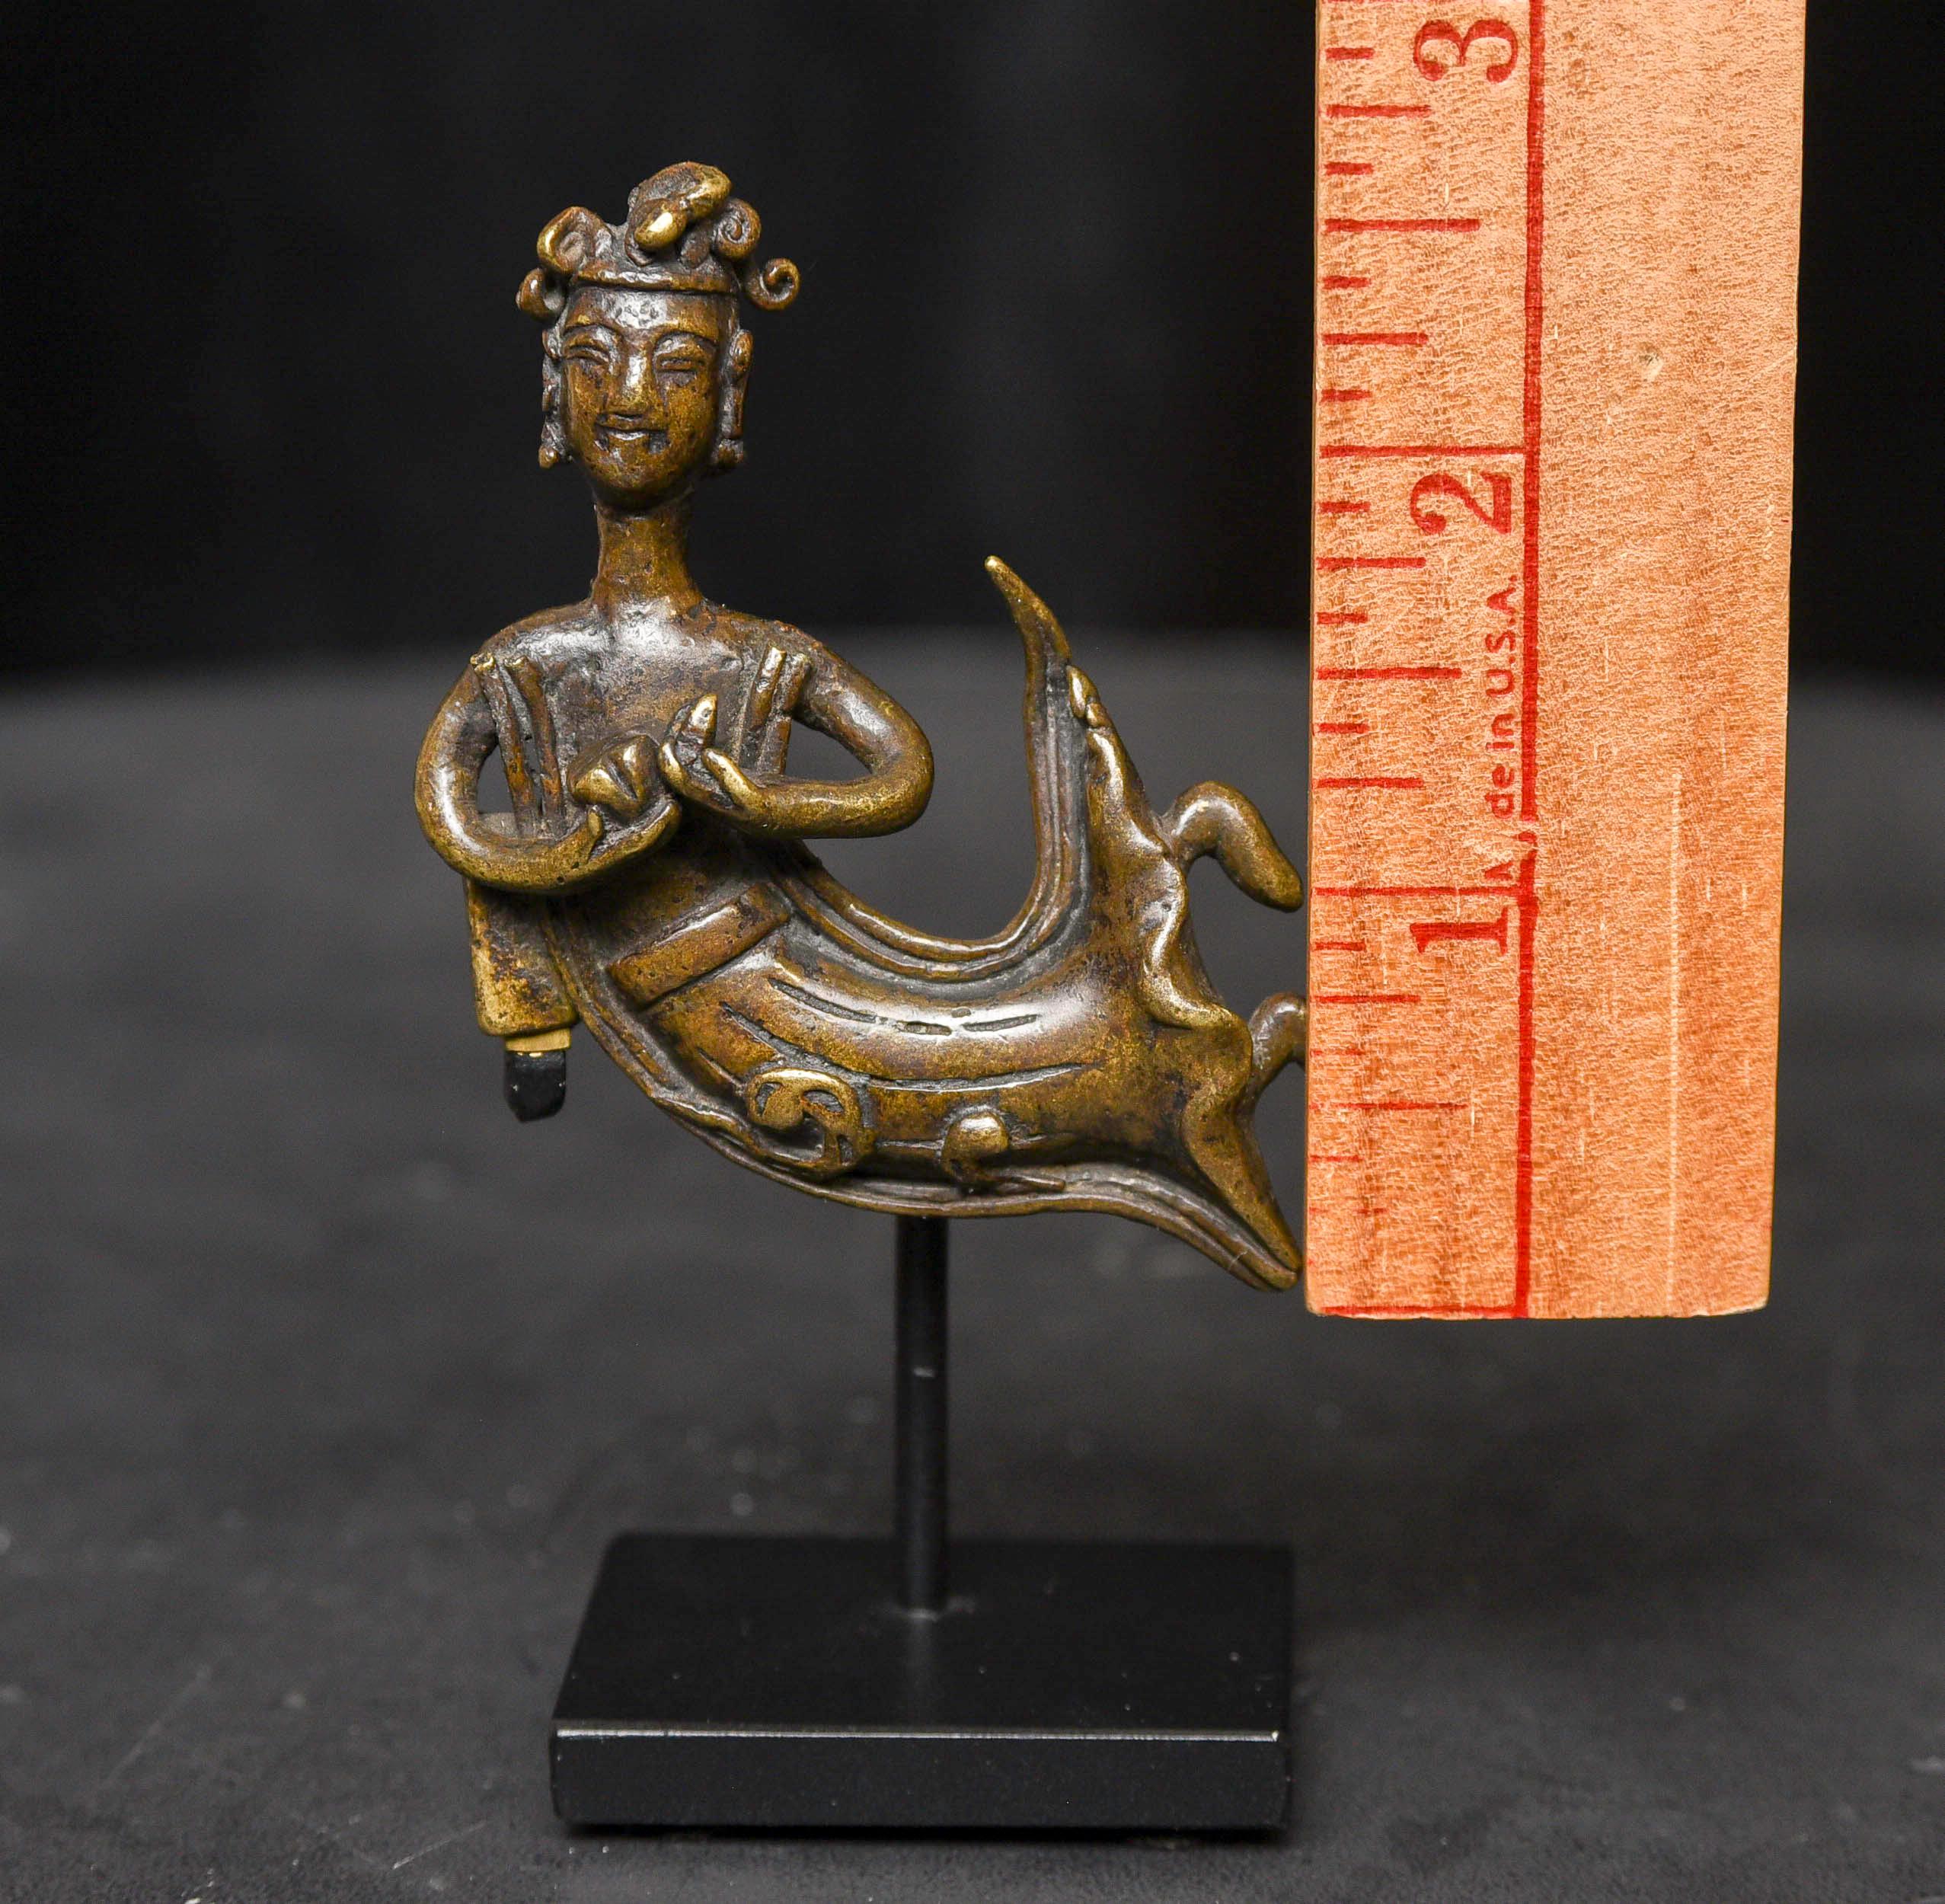 5/6thC Chinese Bronze Buddha - 9585 In Good Condition For Sale In Ukiah, CA